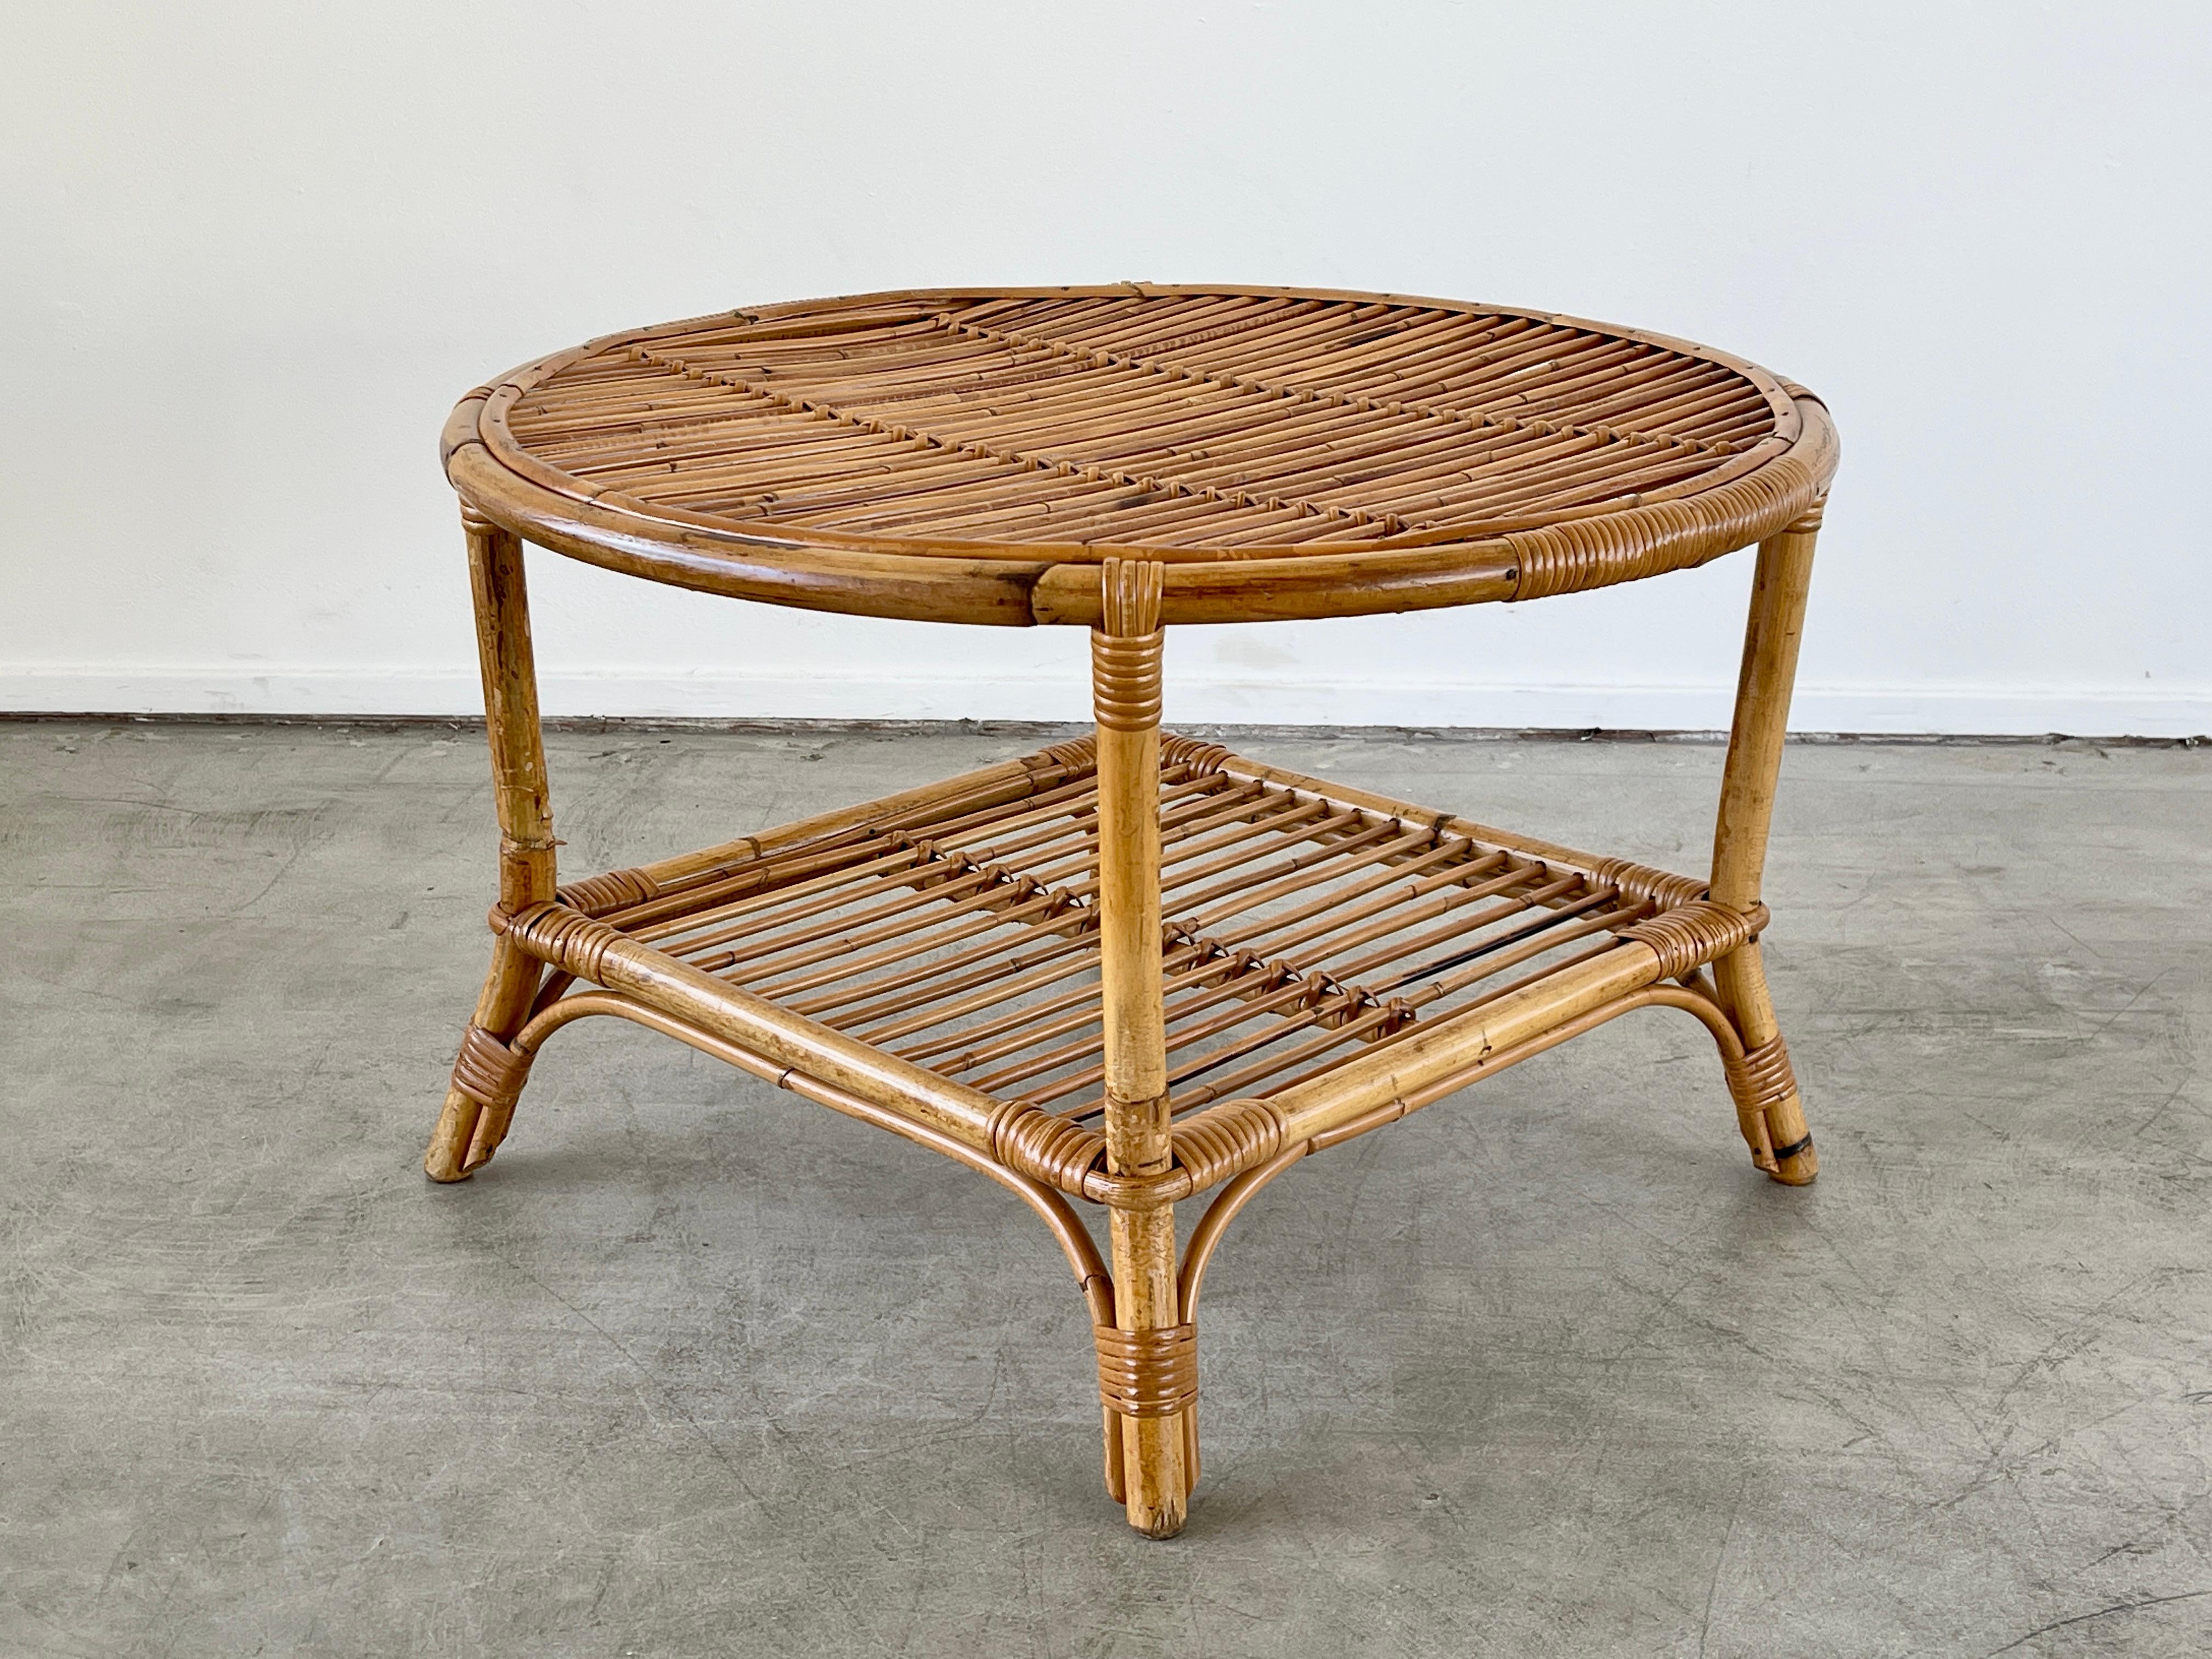 Great circular bamboo rattan table with four legs and slatted bamboo top and shelf.